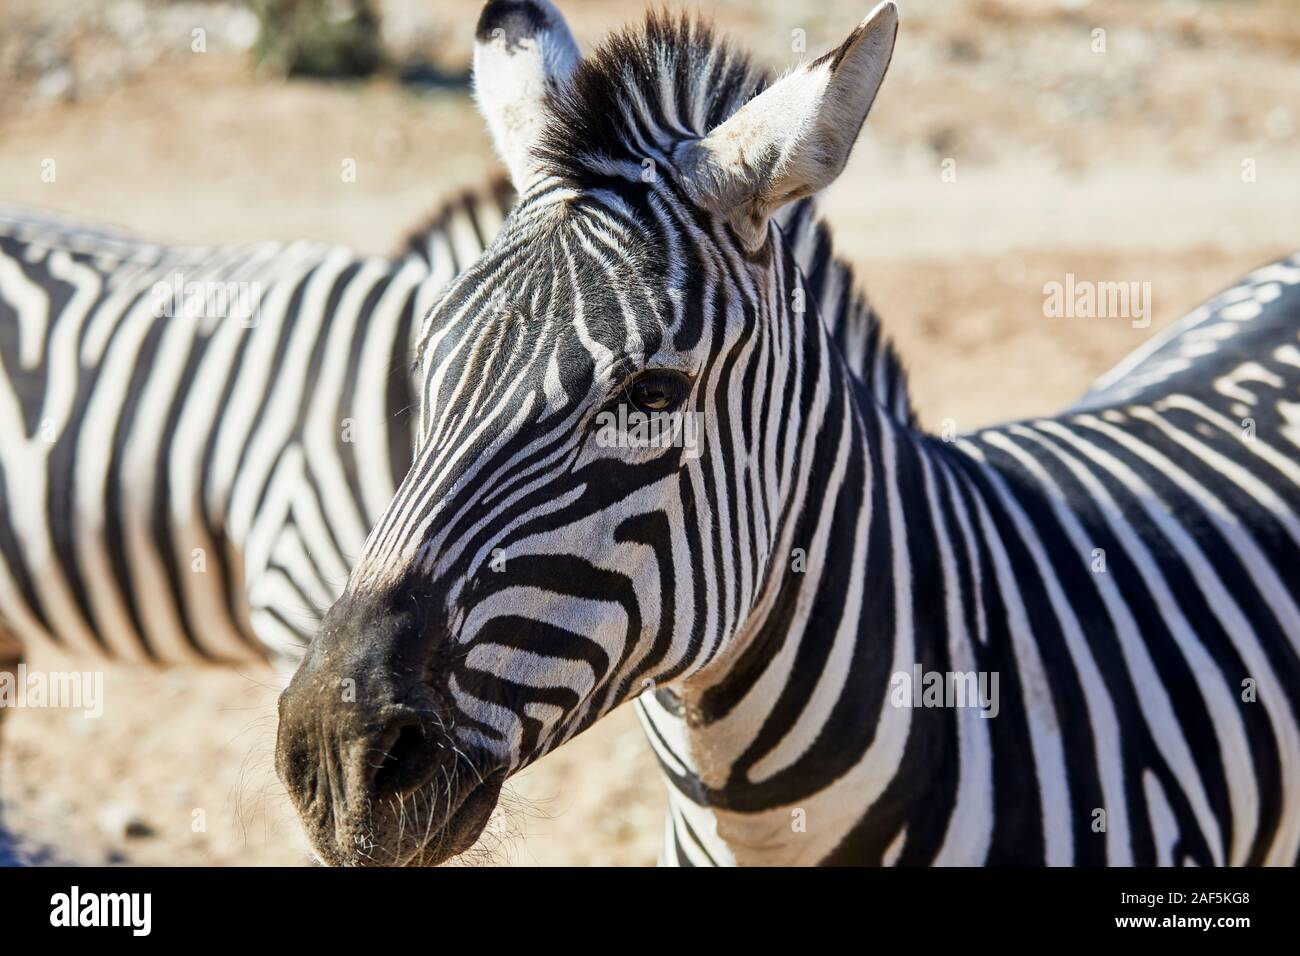 Close up profile of the side of a Zebra's face Stock Photo